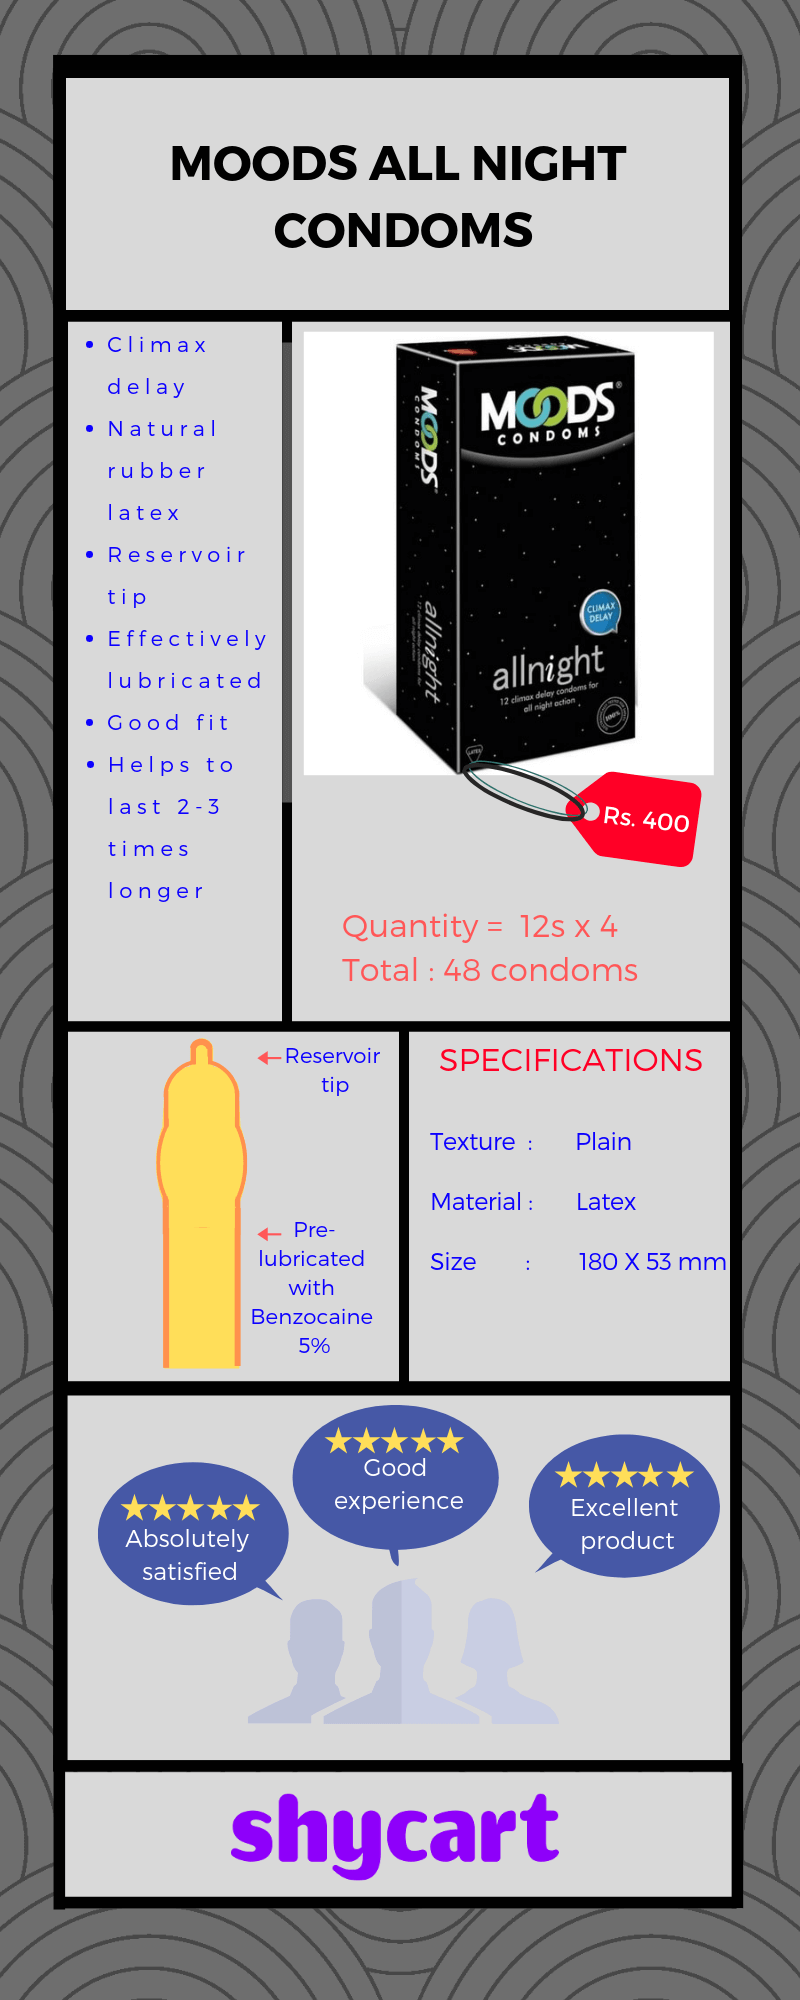 Overview of Moods all night condoms